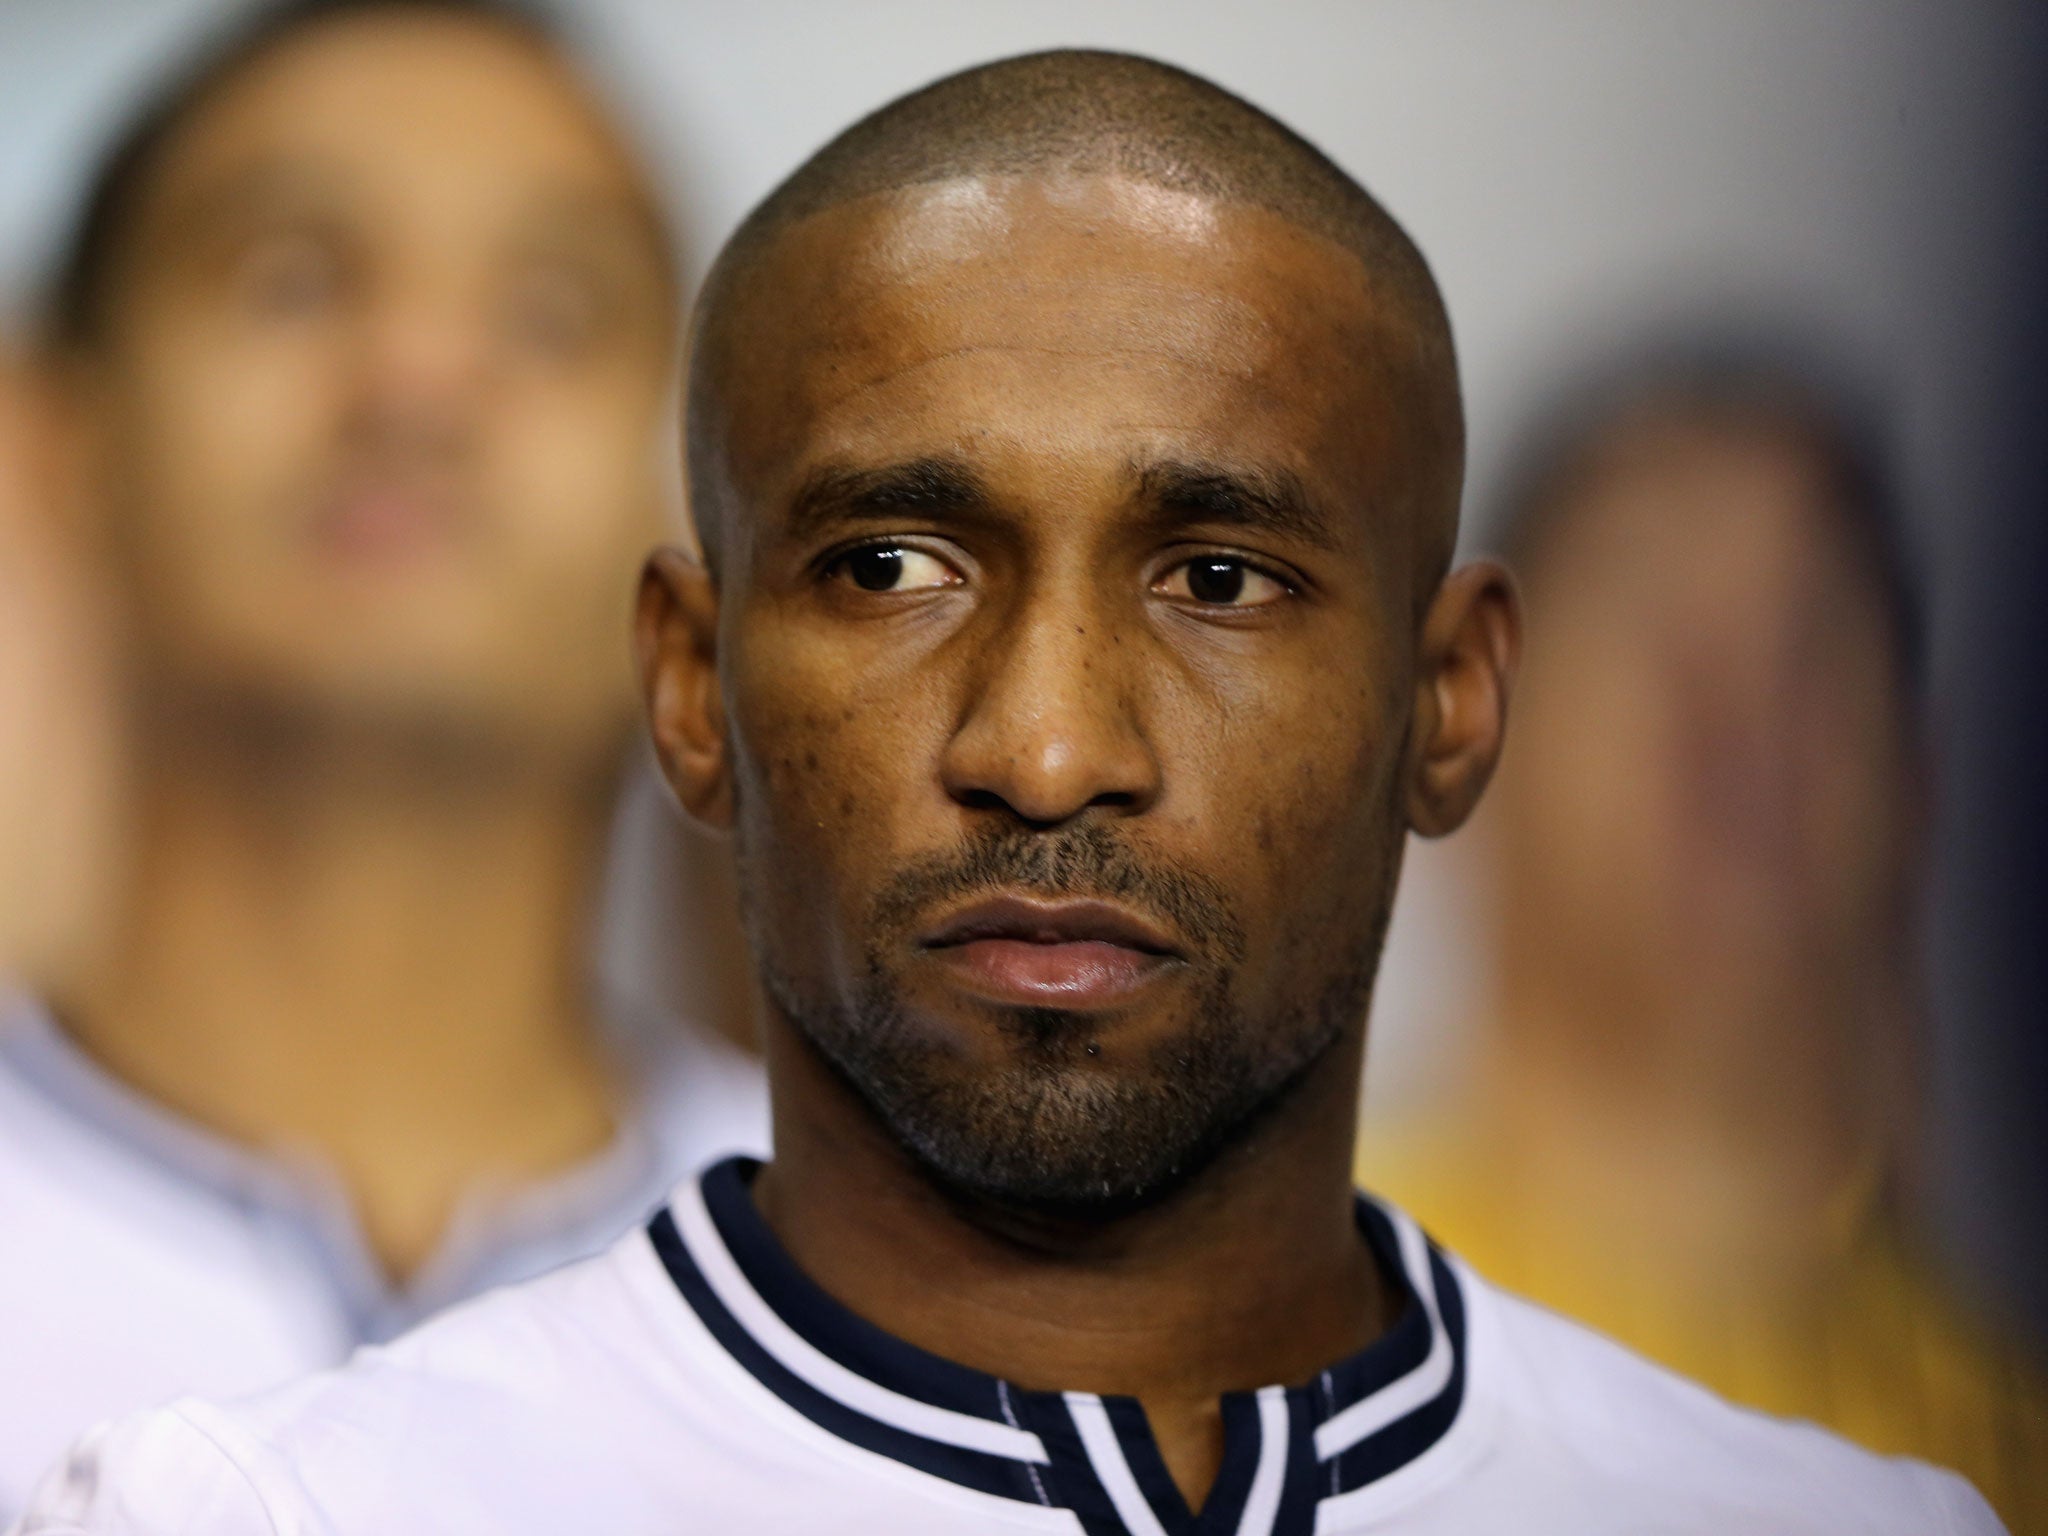 Jermain Defoe is reported to have agreed a move to Toronto FC after struggling for first-team opportunities at Tottenham